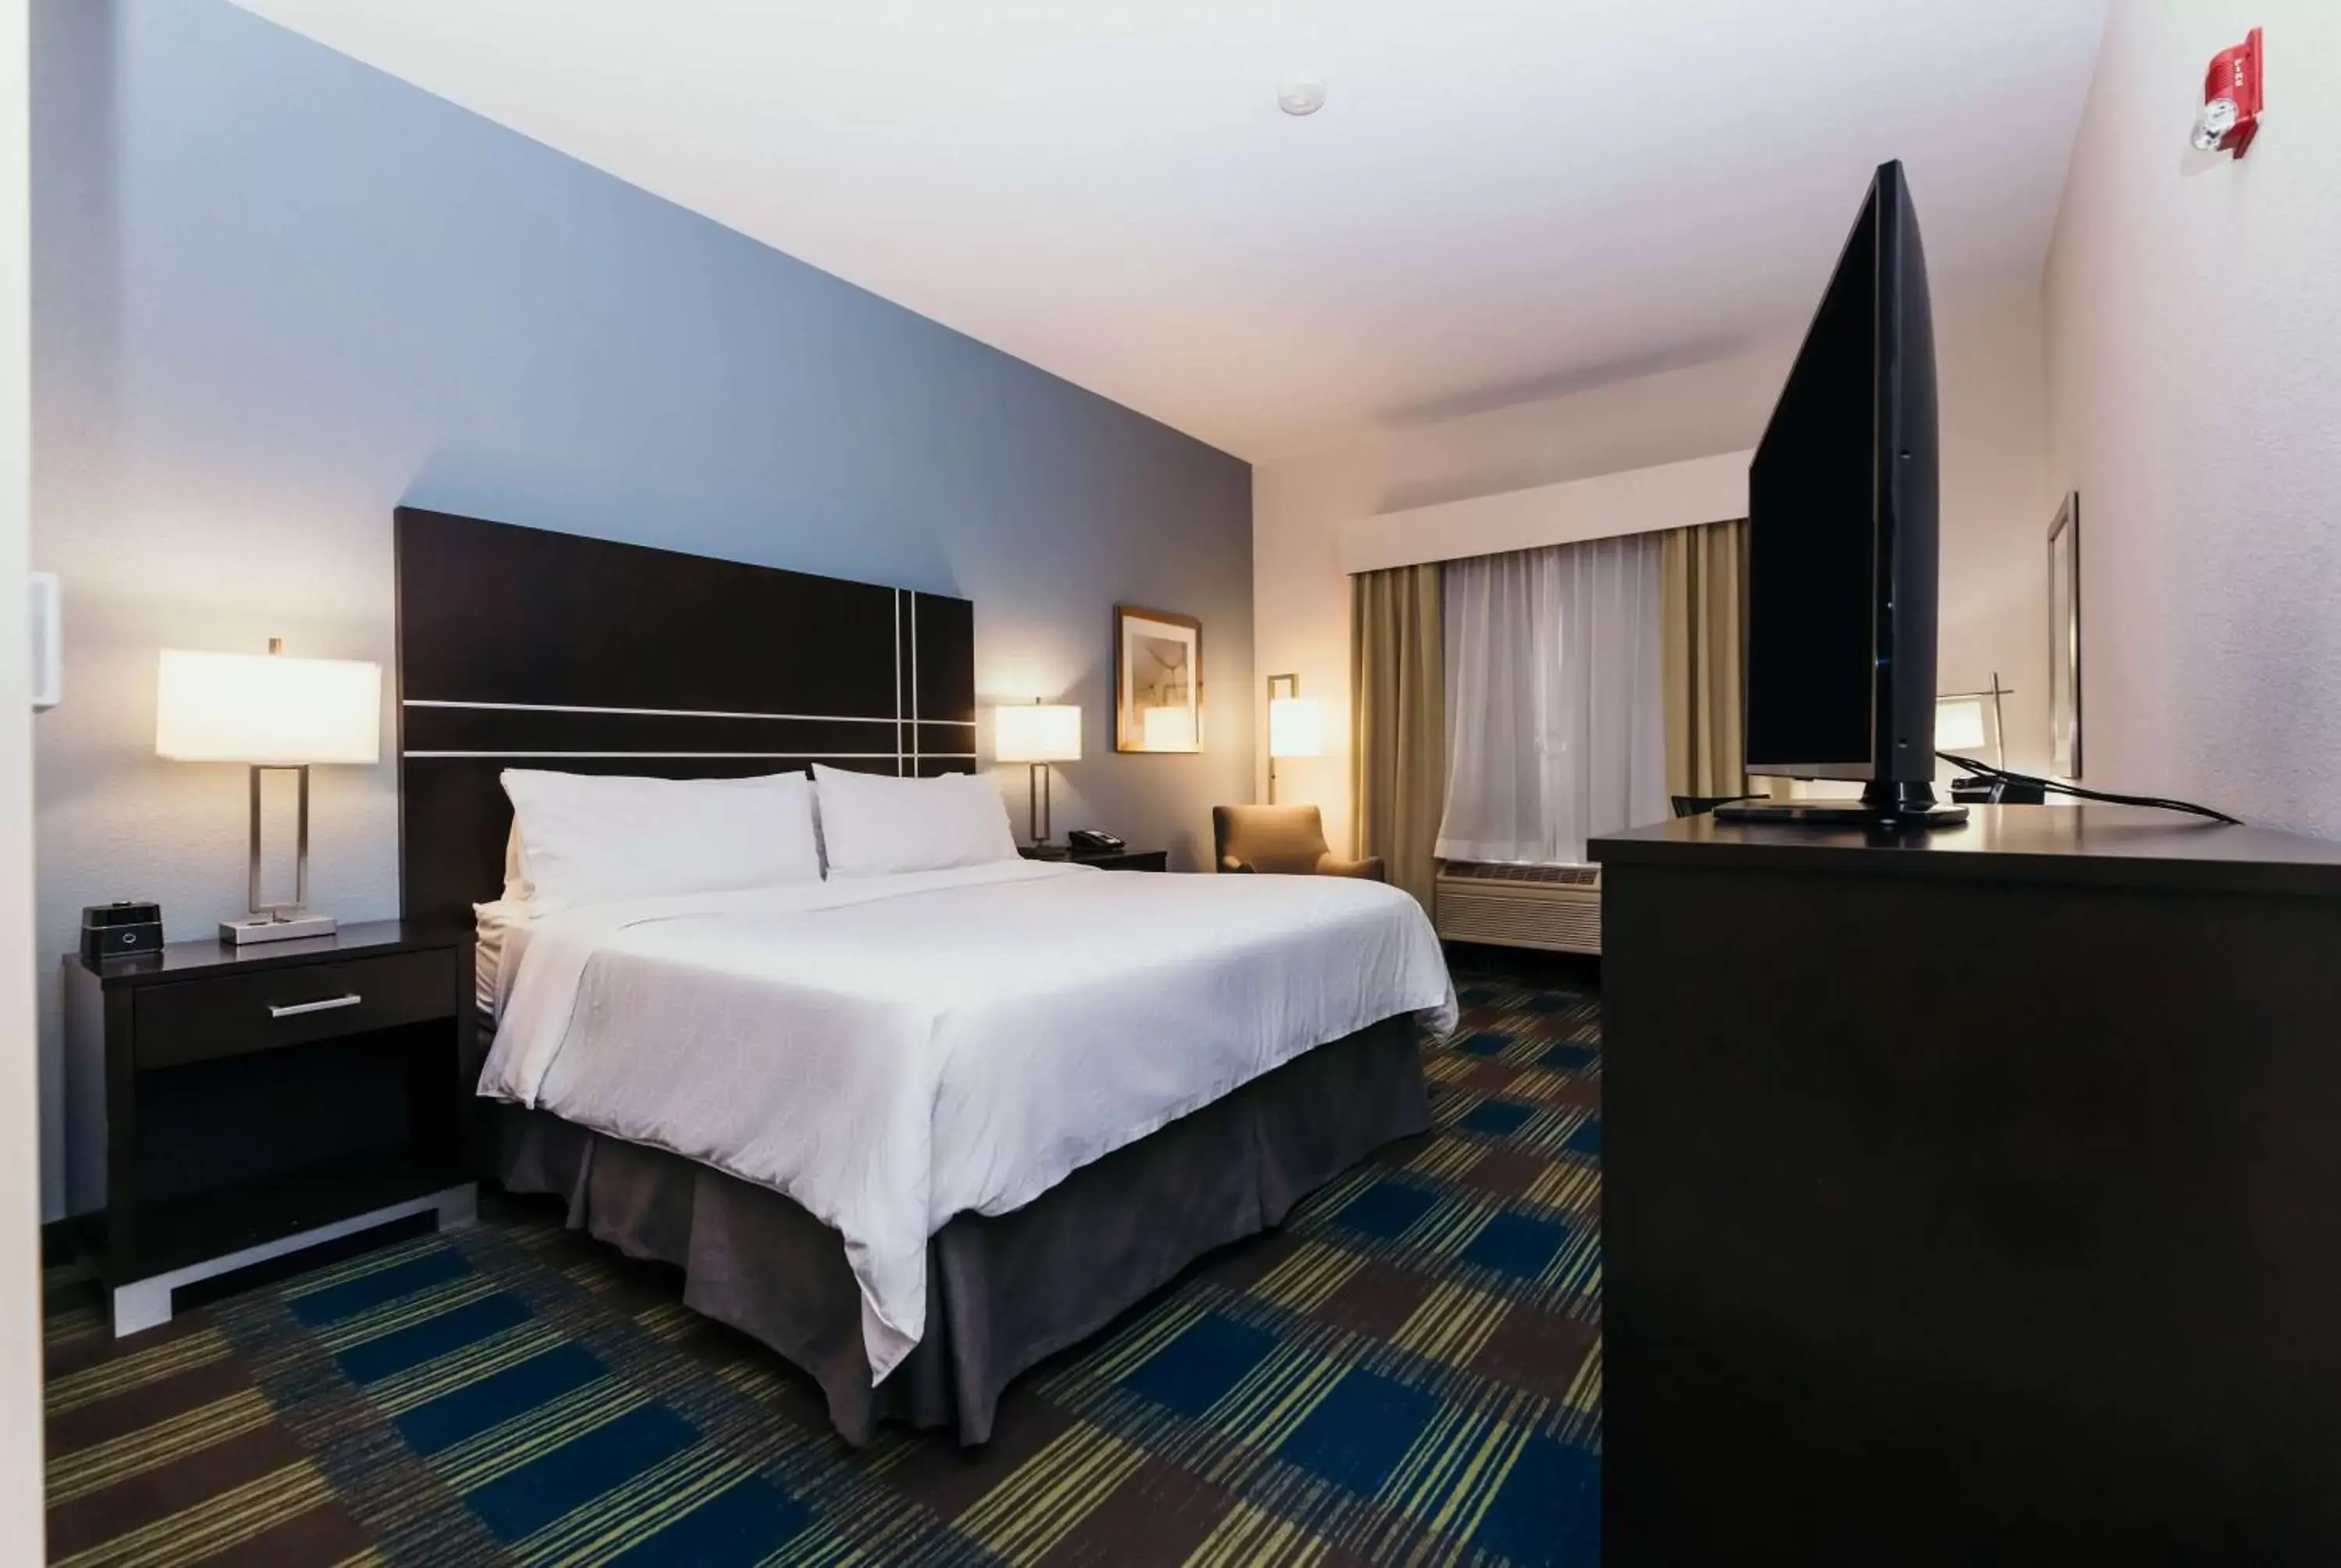 King Room with Mobility Access and Bathtub with Grab Bars, Non-Smoking in La Quinta Inn & Suites by Wyndham Ankeny IA - Des Moines IA